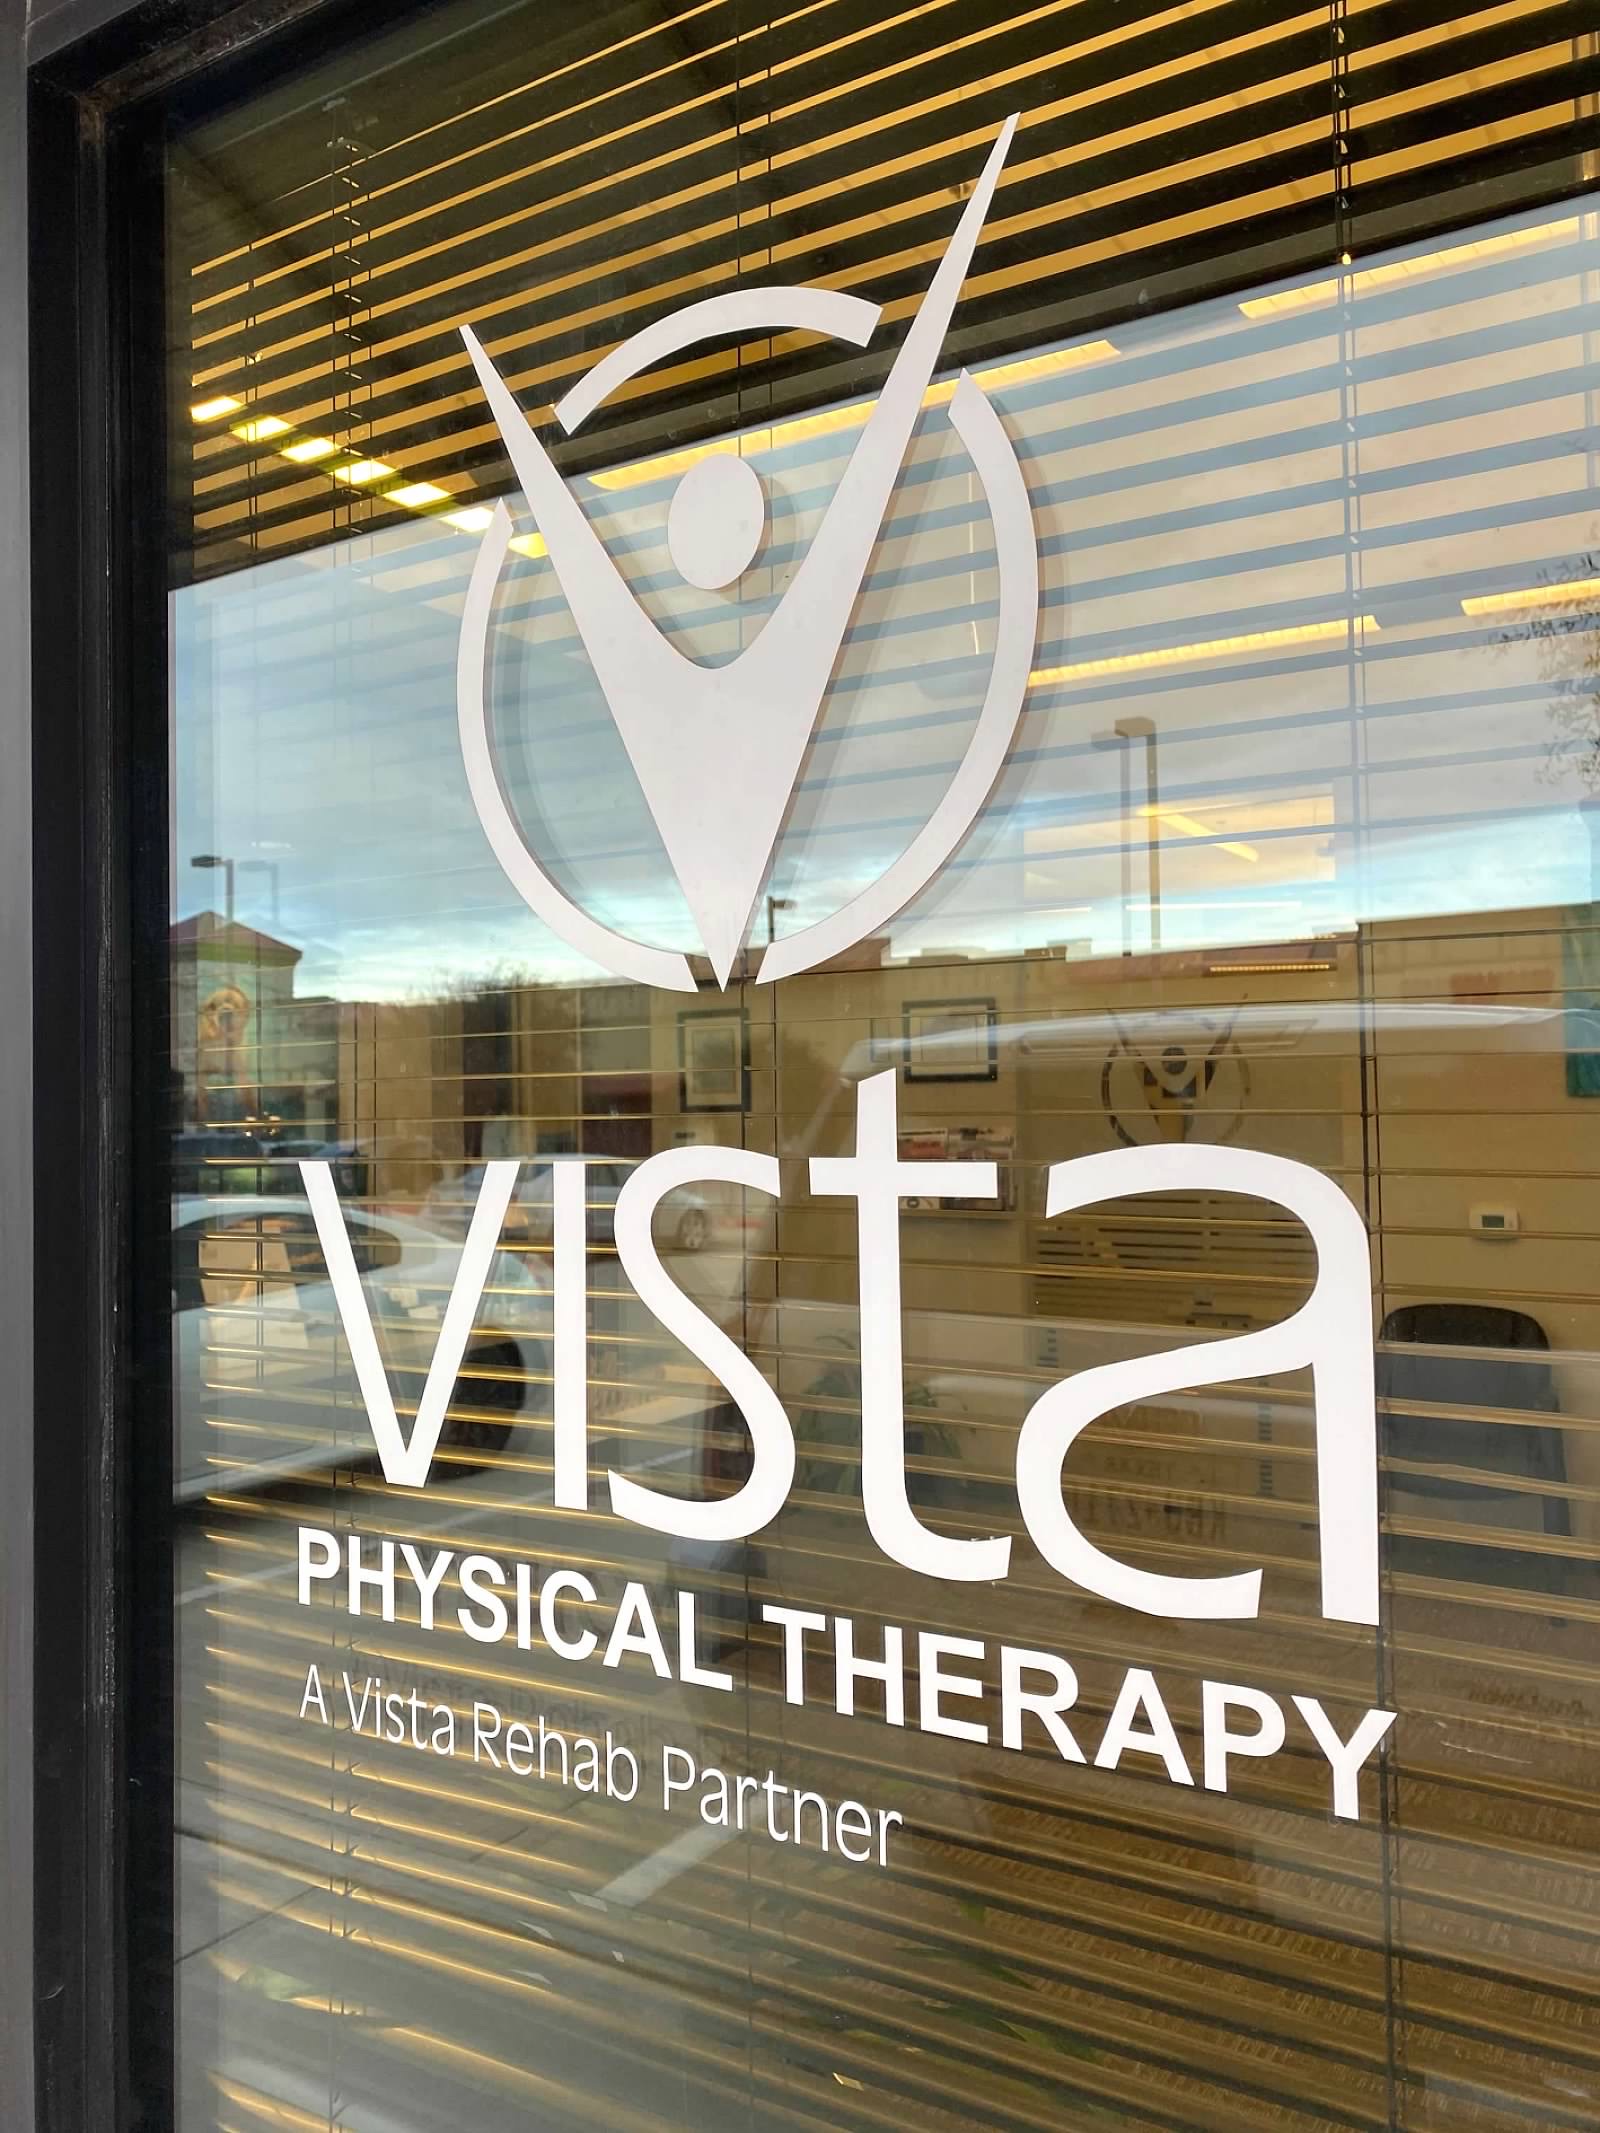 Vista Physical Therapy
821 N Coleman St
Prosper